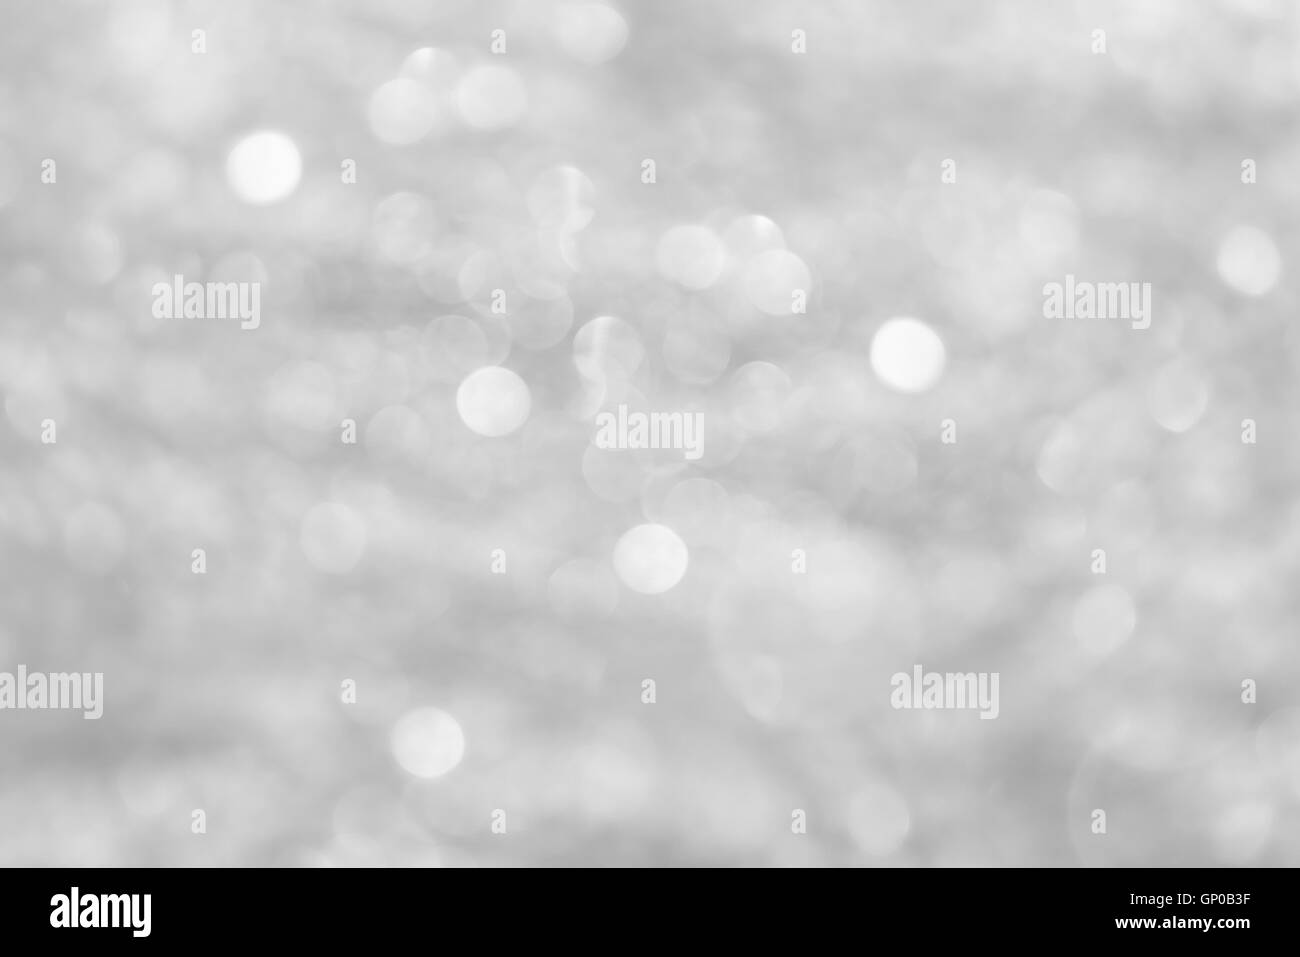 abstract festival background with defocused lights. black and white. Stock Photo